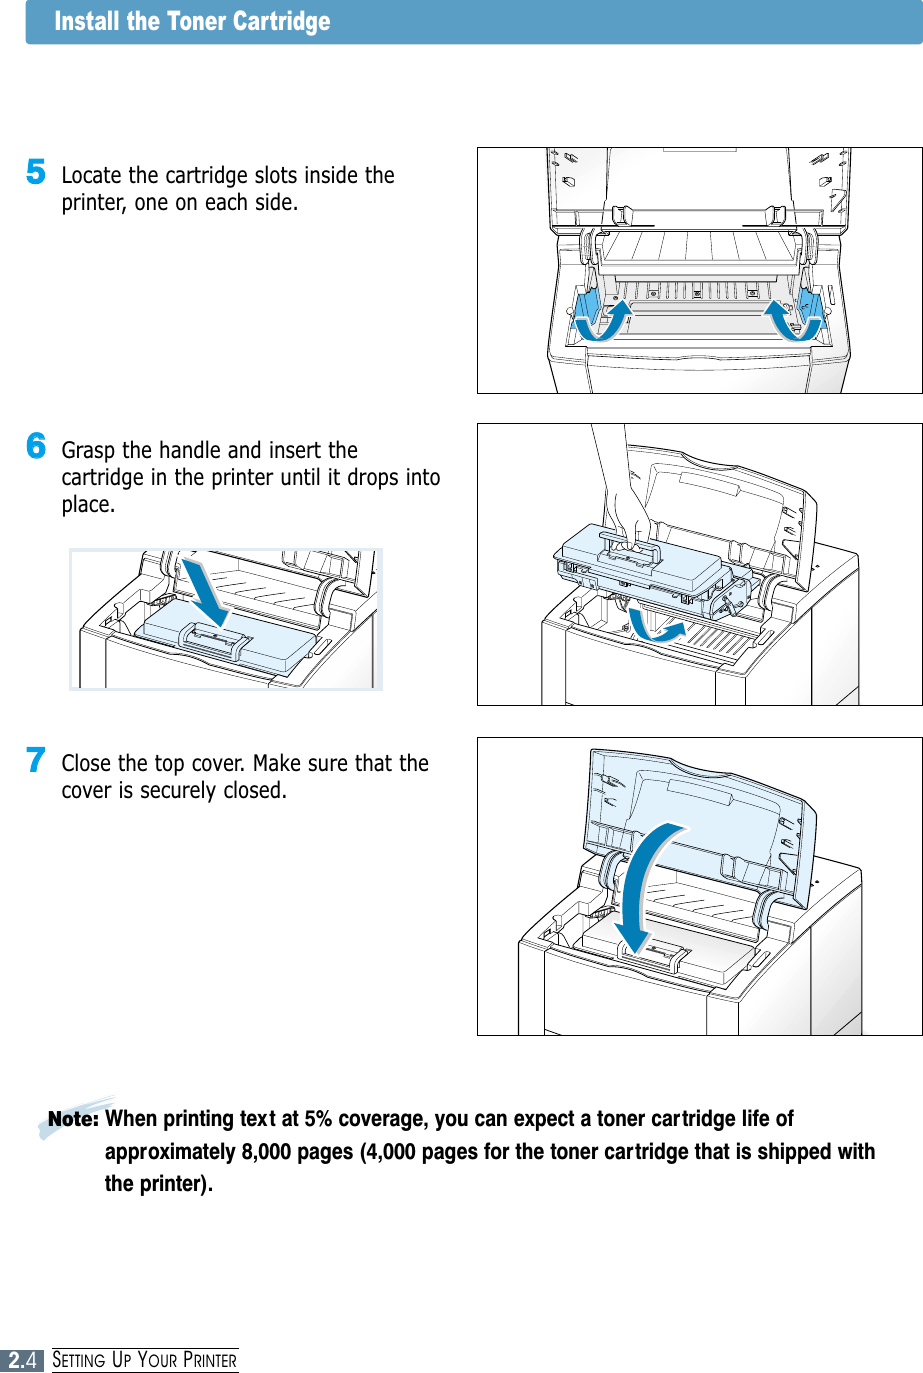 2.4SETTING UPYOUR PRINTERNote: When printing text at 5% coverage, you can expect a toner cartridge life ofapproximately 8,000 pages (4,000 pages for the toner cartridge that is shipped withthe printer).66Grasp the handle and insert thecartridge in the printer until it drops intoplace.77Close the top cover. Make sure that thecover is securely closed.55Locate the cartridge slots inside theprinter, one on each side.Install the Toner Cartridge